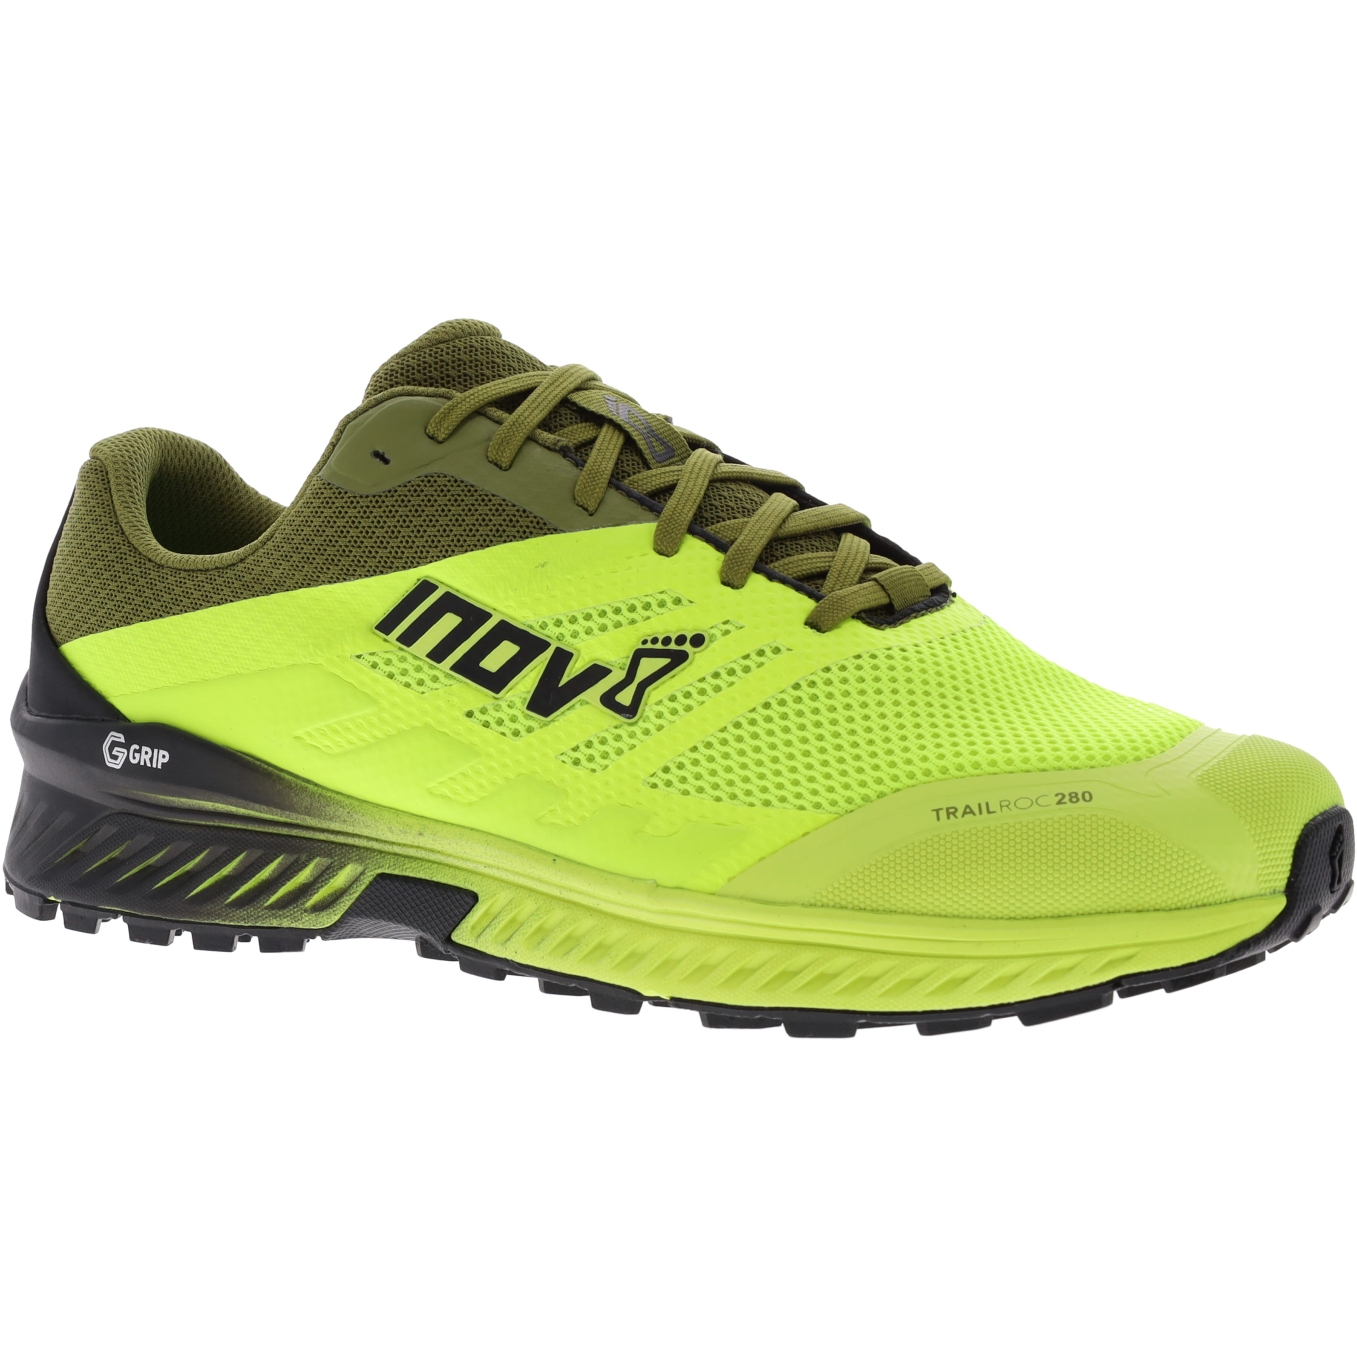 Image of Inov-8 Trailroc G 280 Trail Running Shoes - yellow/green